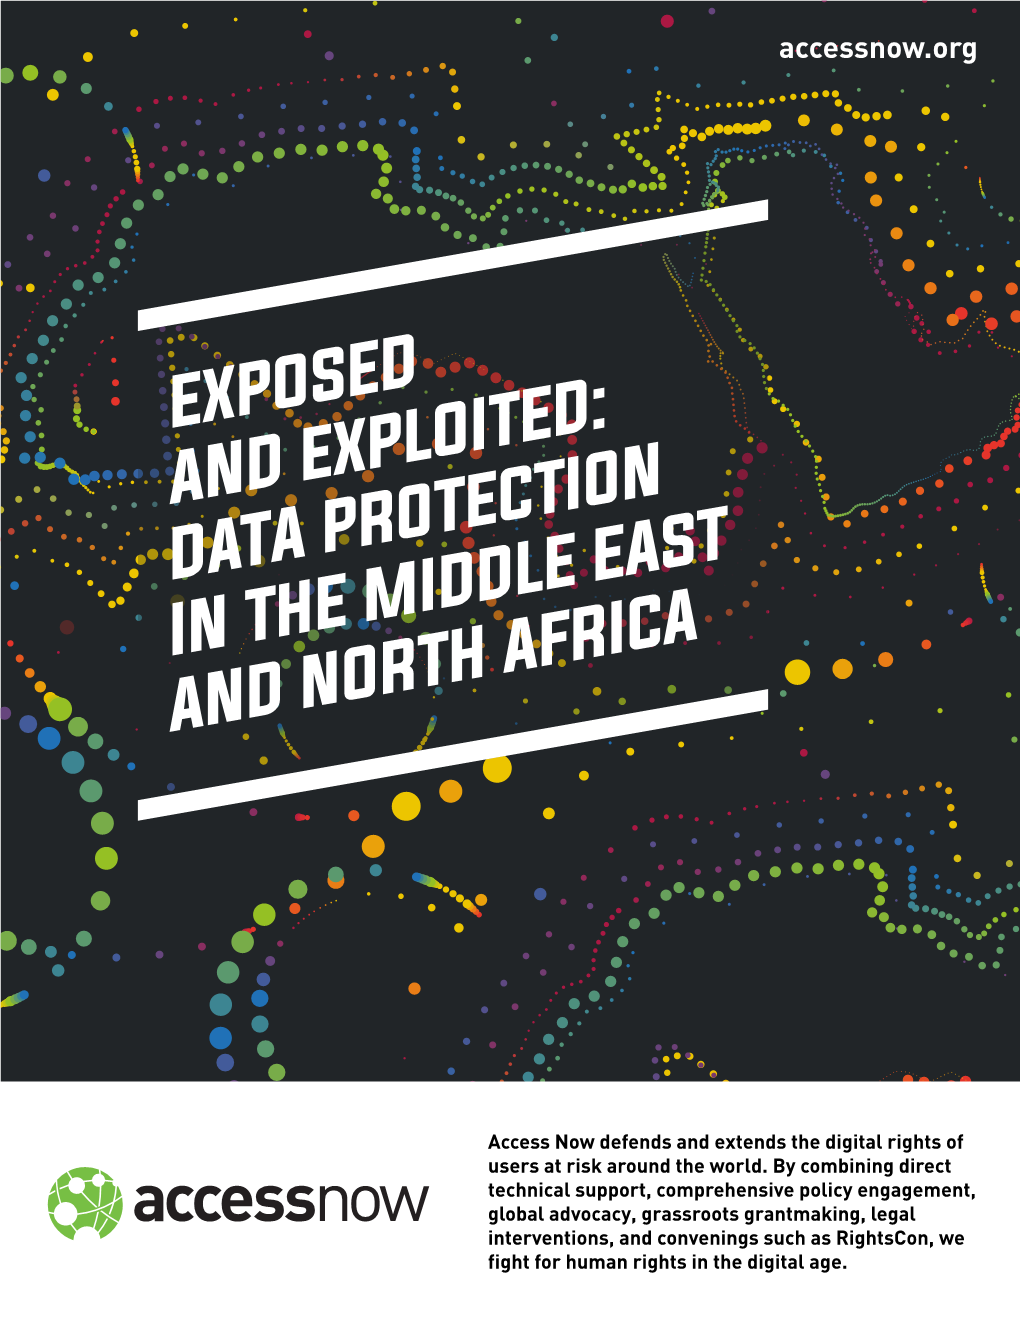 Data Protection in the Middle East and North Africa